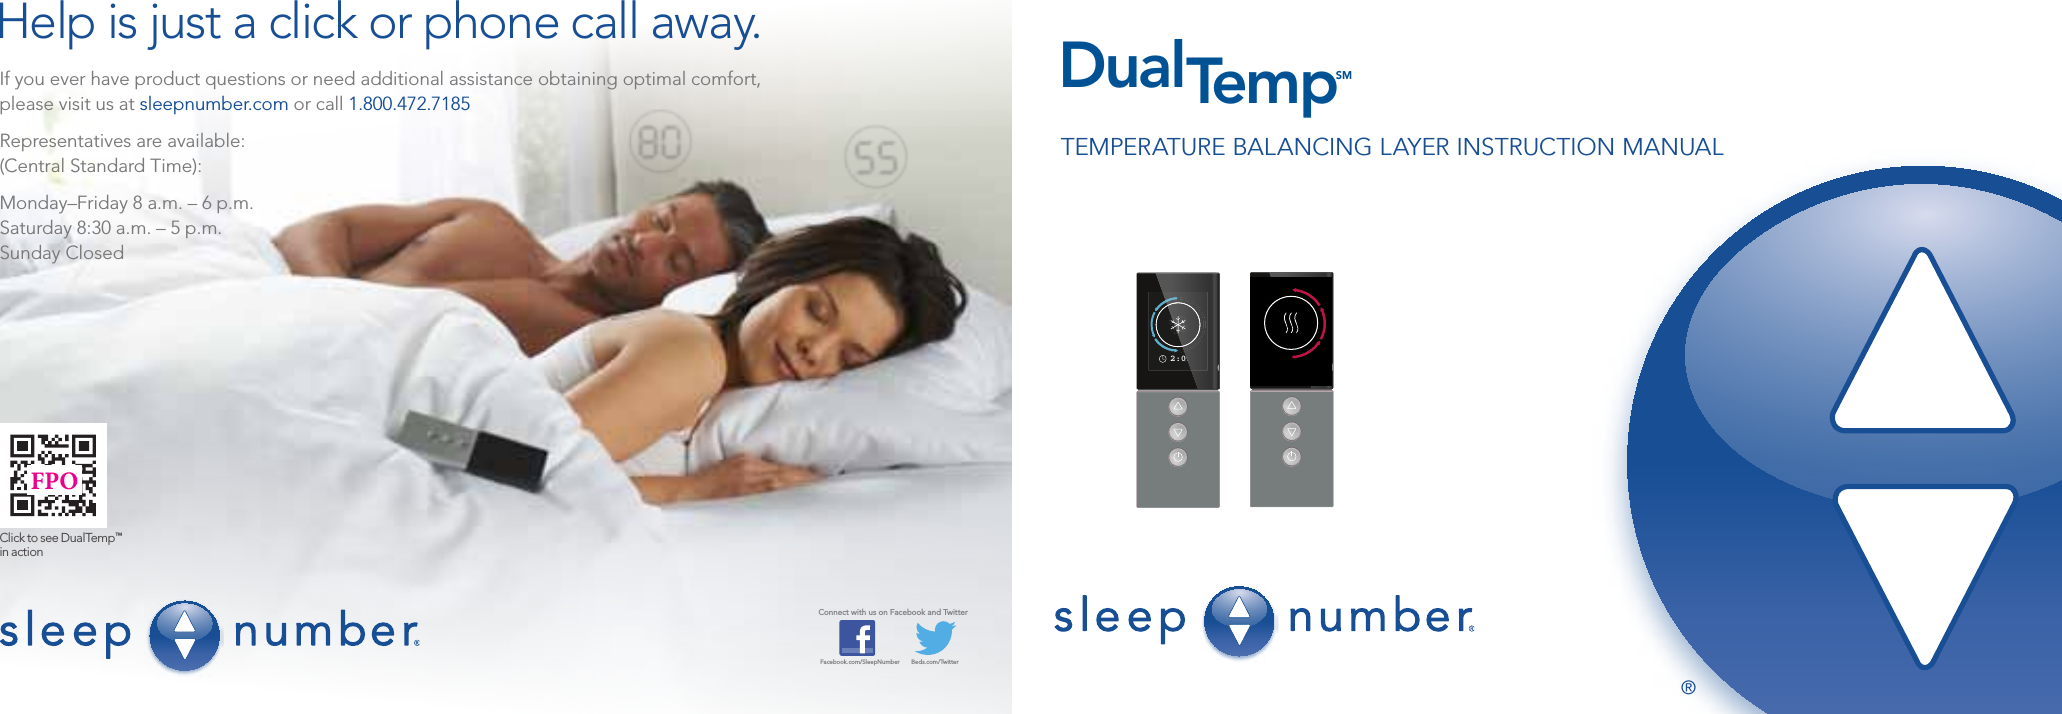 TEMPERATURE BALANCING LAYER INSTRUCTION MANUALDualTempSMIf you ever have product questions or need additional assistance obtaining optimal comfort, please visit us at sleepnumber.com or call 1.800.472.7185Representatives are available:(Central Standard Time):Monday–Friday 8 a.m. – 6 p.m.Saturday 8:30 a.m. – 5 p.m.Sunday ClosedConnect with us on Facebook and TwitterFacebook.com/SleepNumber       Beds.com/TwitterHelp is just a click or phone call away.®Click to see DualTemp™ in actionFPO2:00 2:00Sara